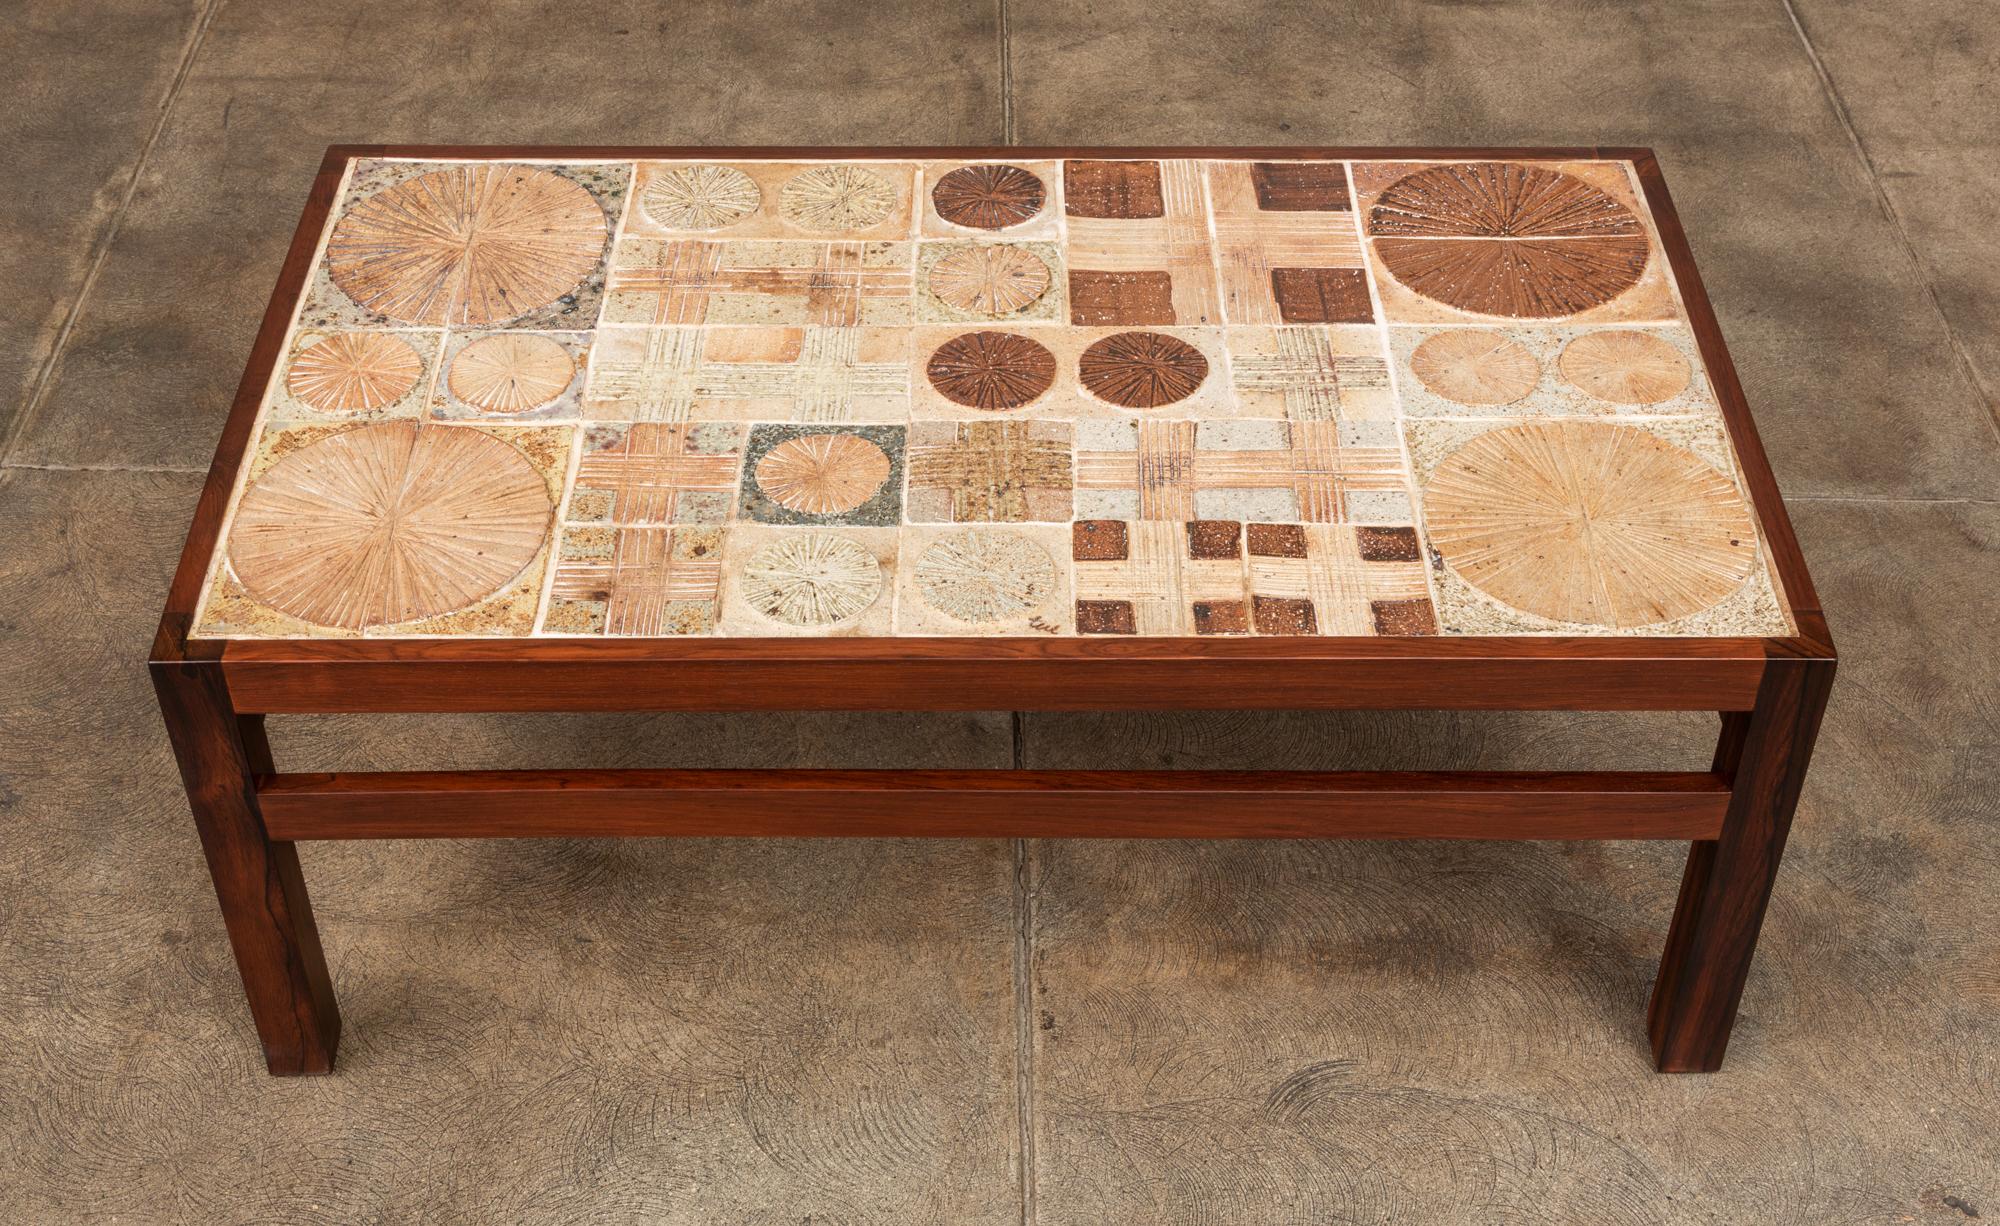 Danish Rosewood and Mosaic Tile Coffee Table by Tue Poulsen